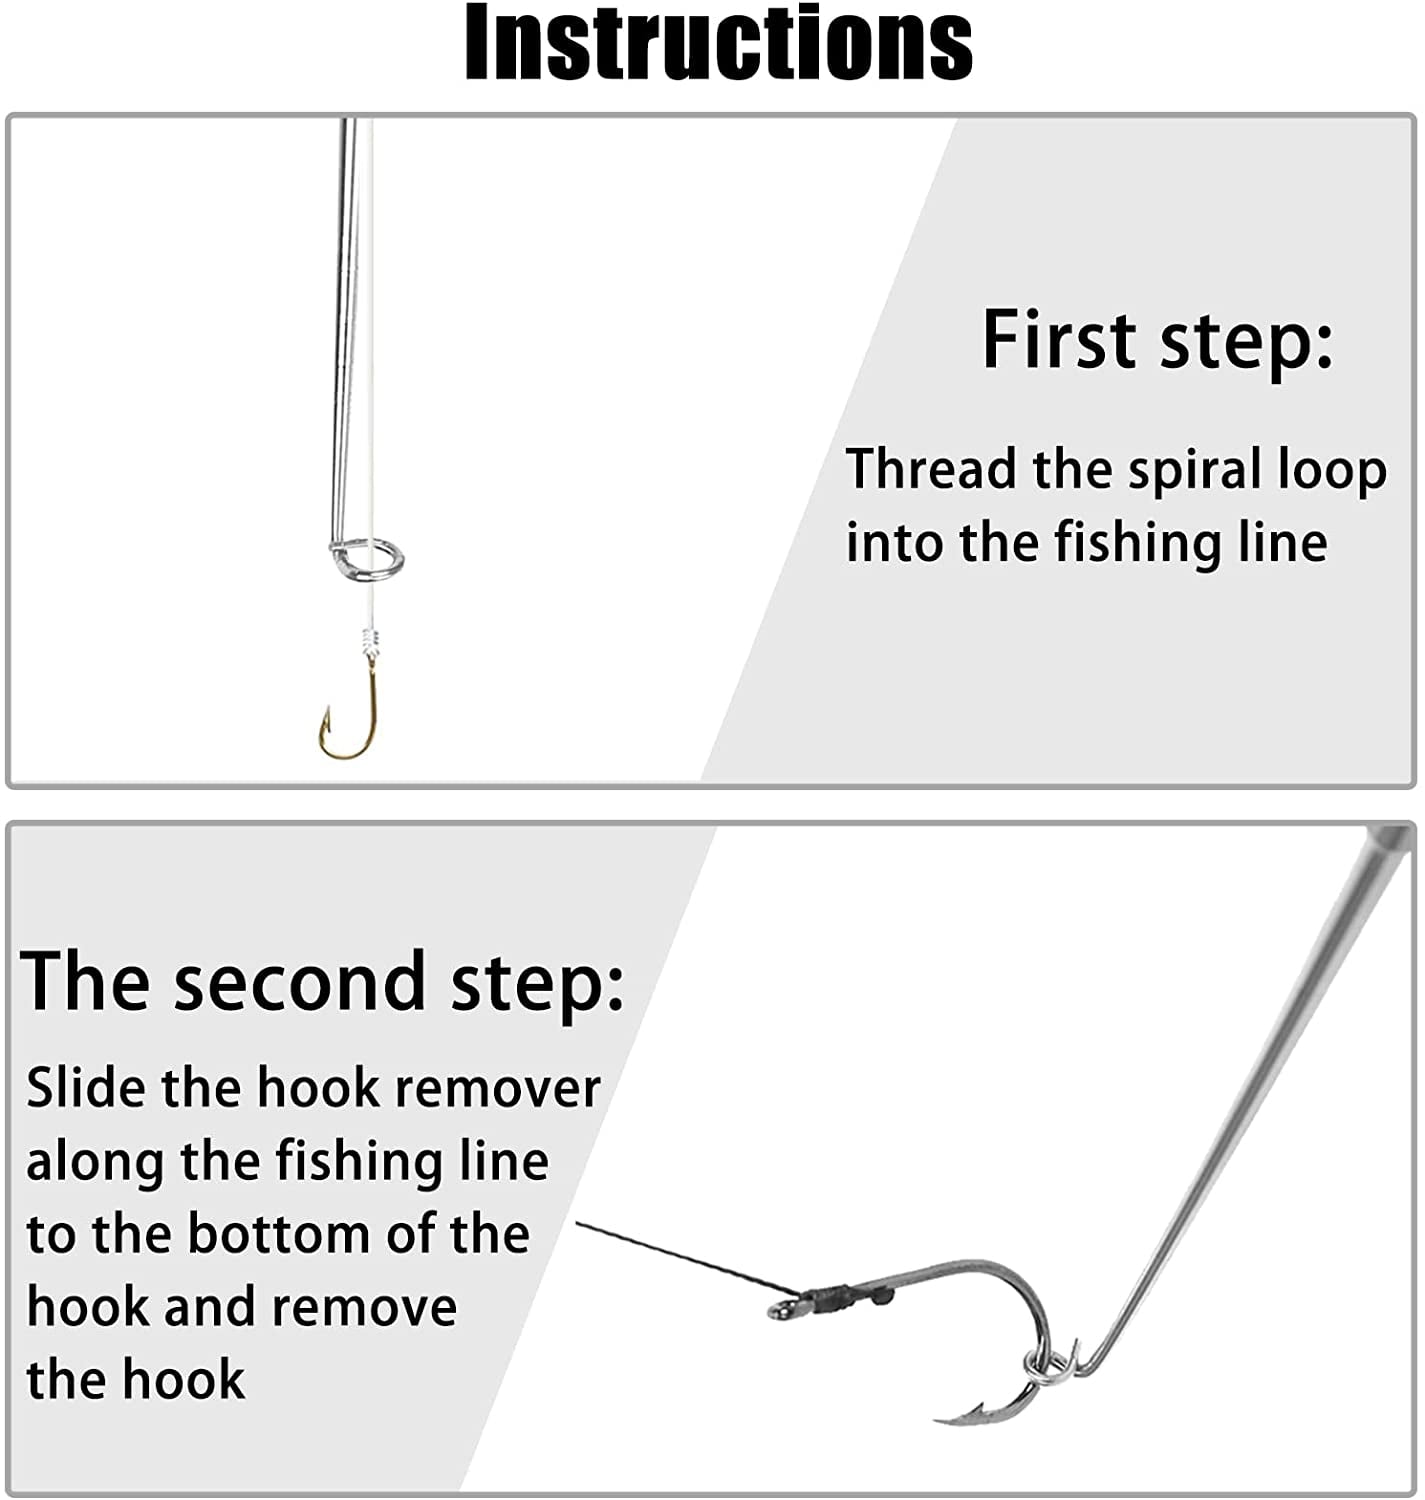 Fishing Hook Quick Removal Device-Buy 1 Get 1 Free